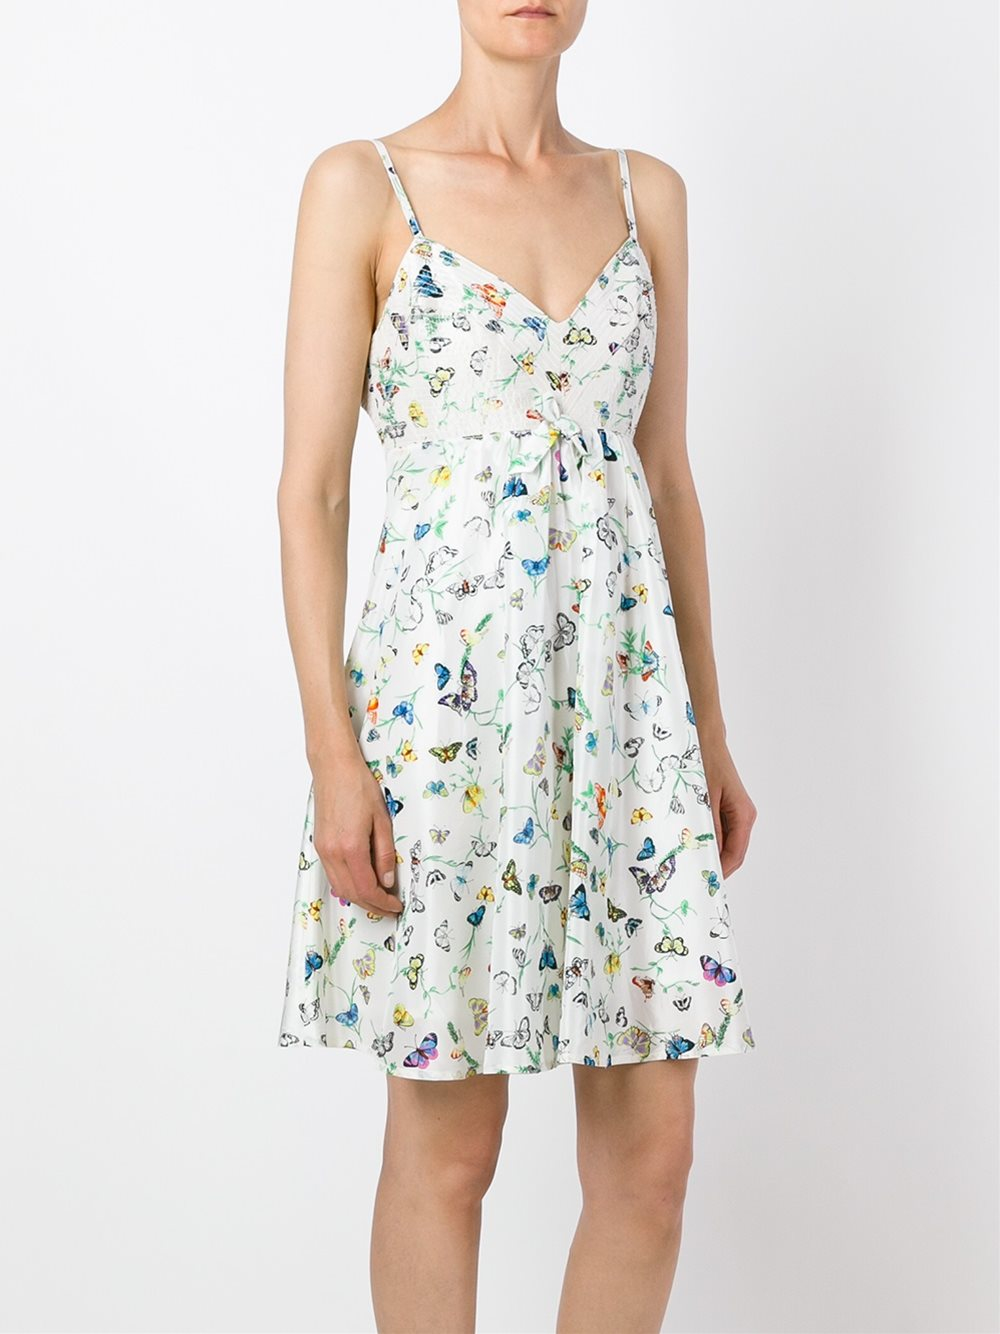 Versace Butterfly Print Dress in White - Lyst